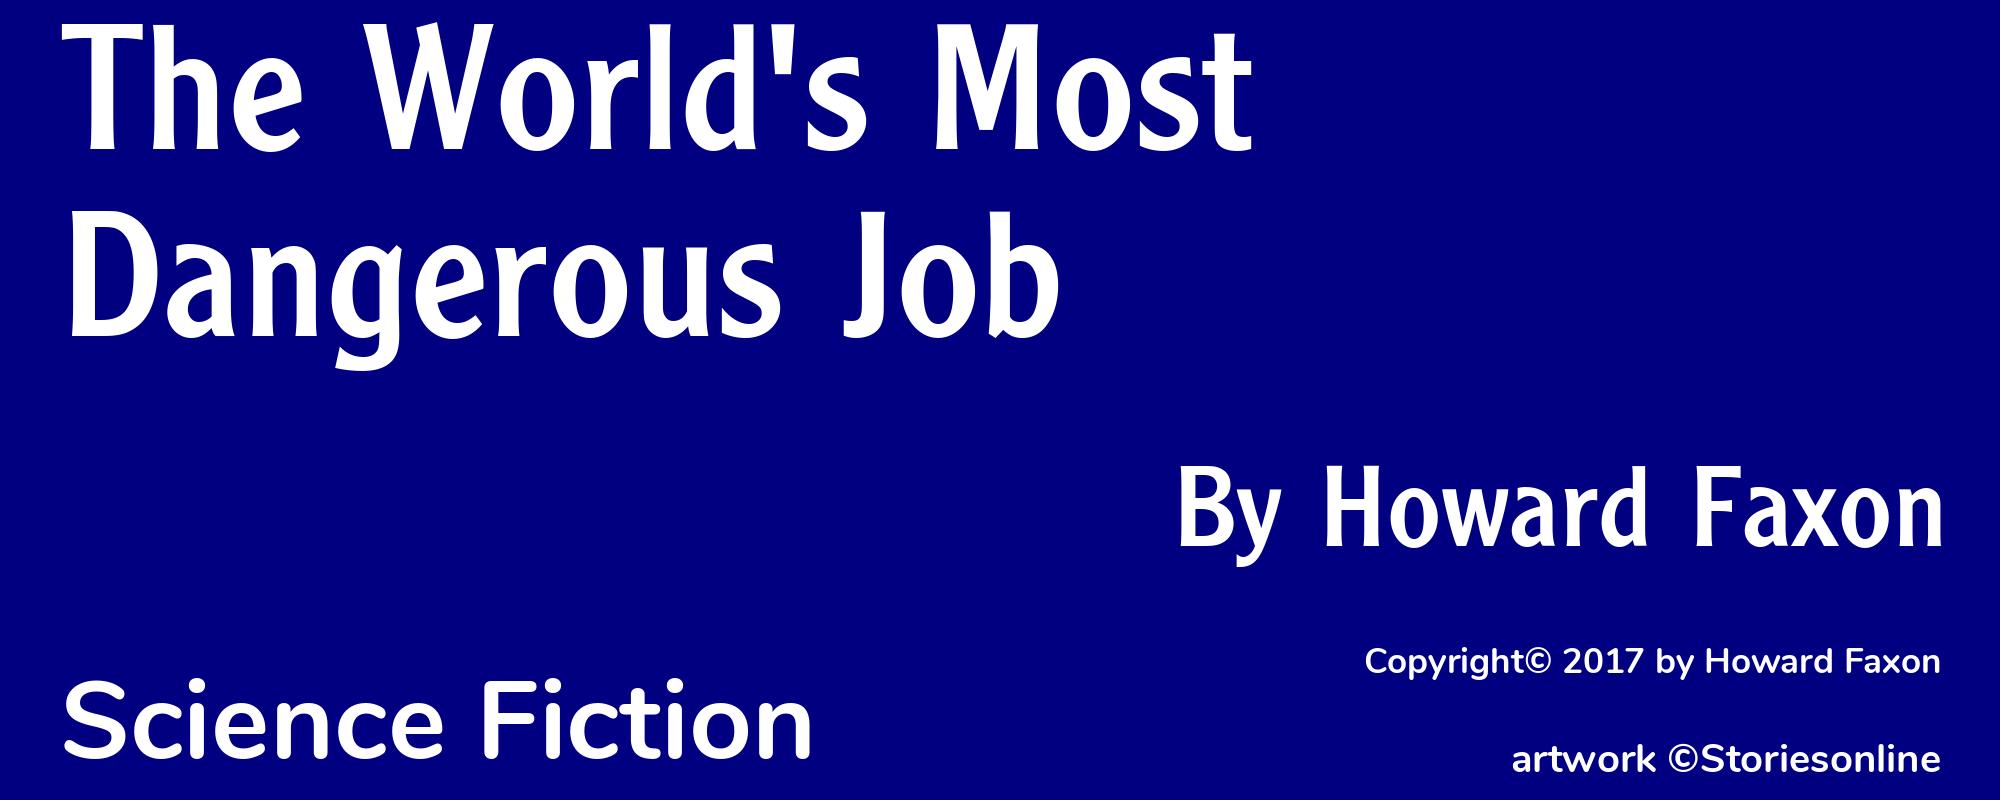 The World's Most Dangerous Job - Cover